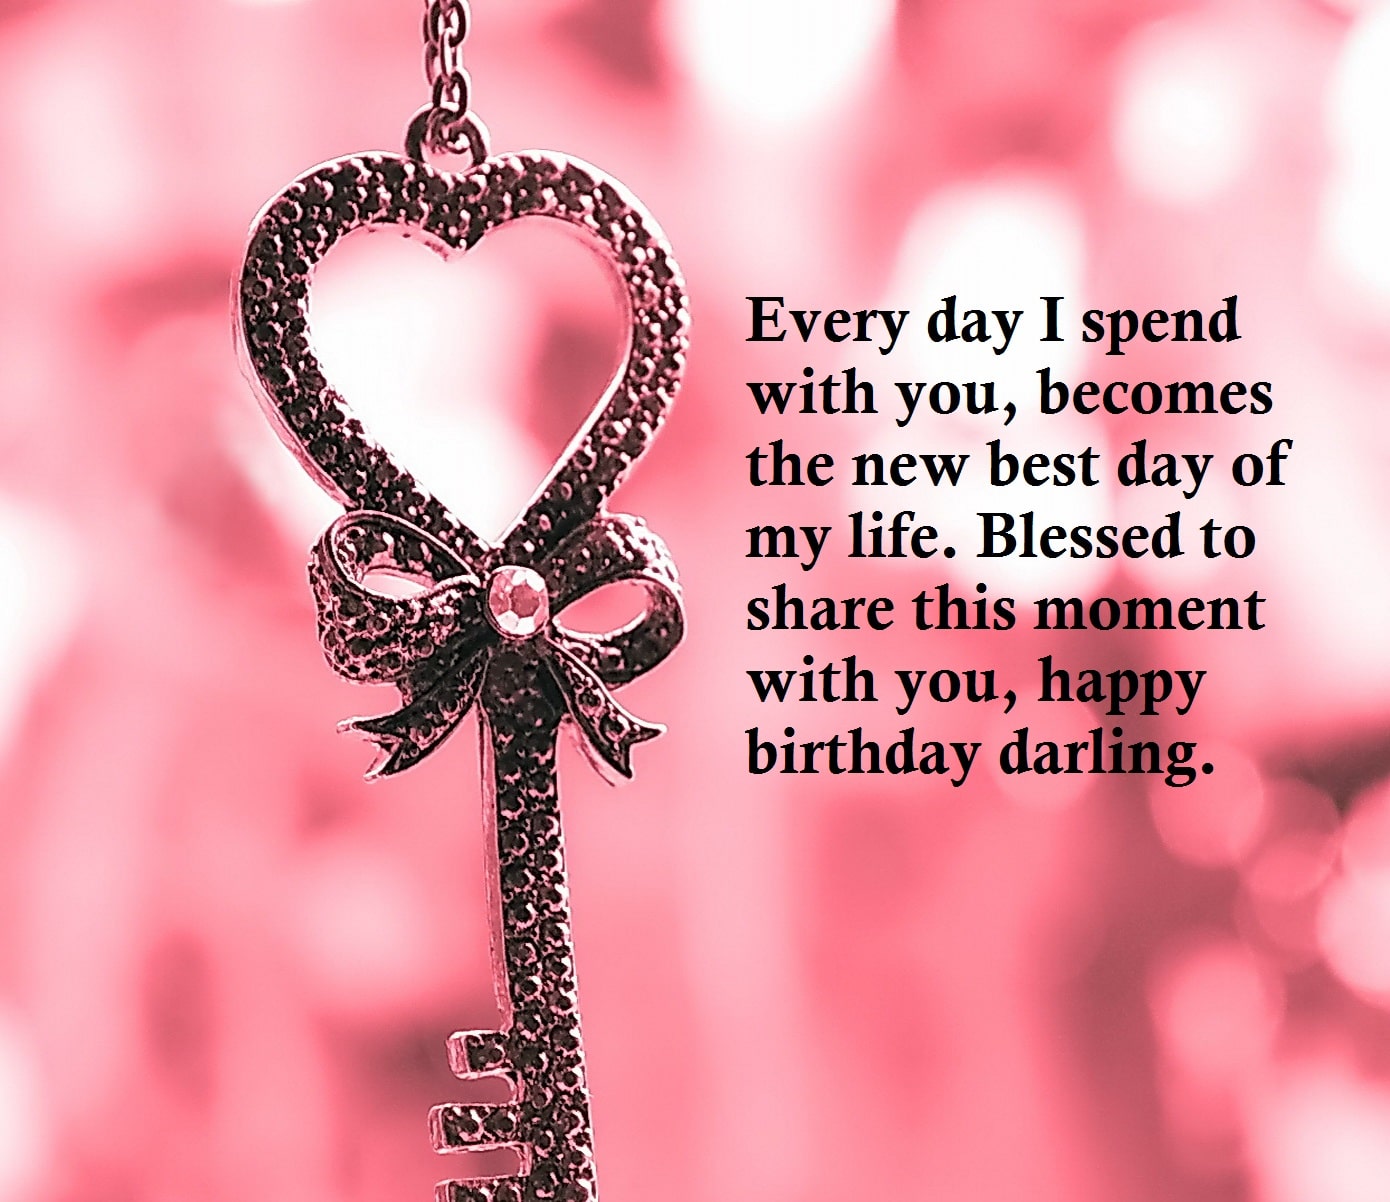 birthday-wishes-messages-for-husband-best-wishes